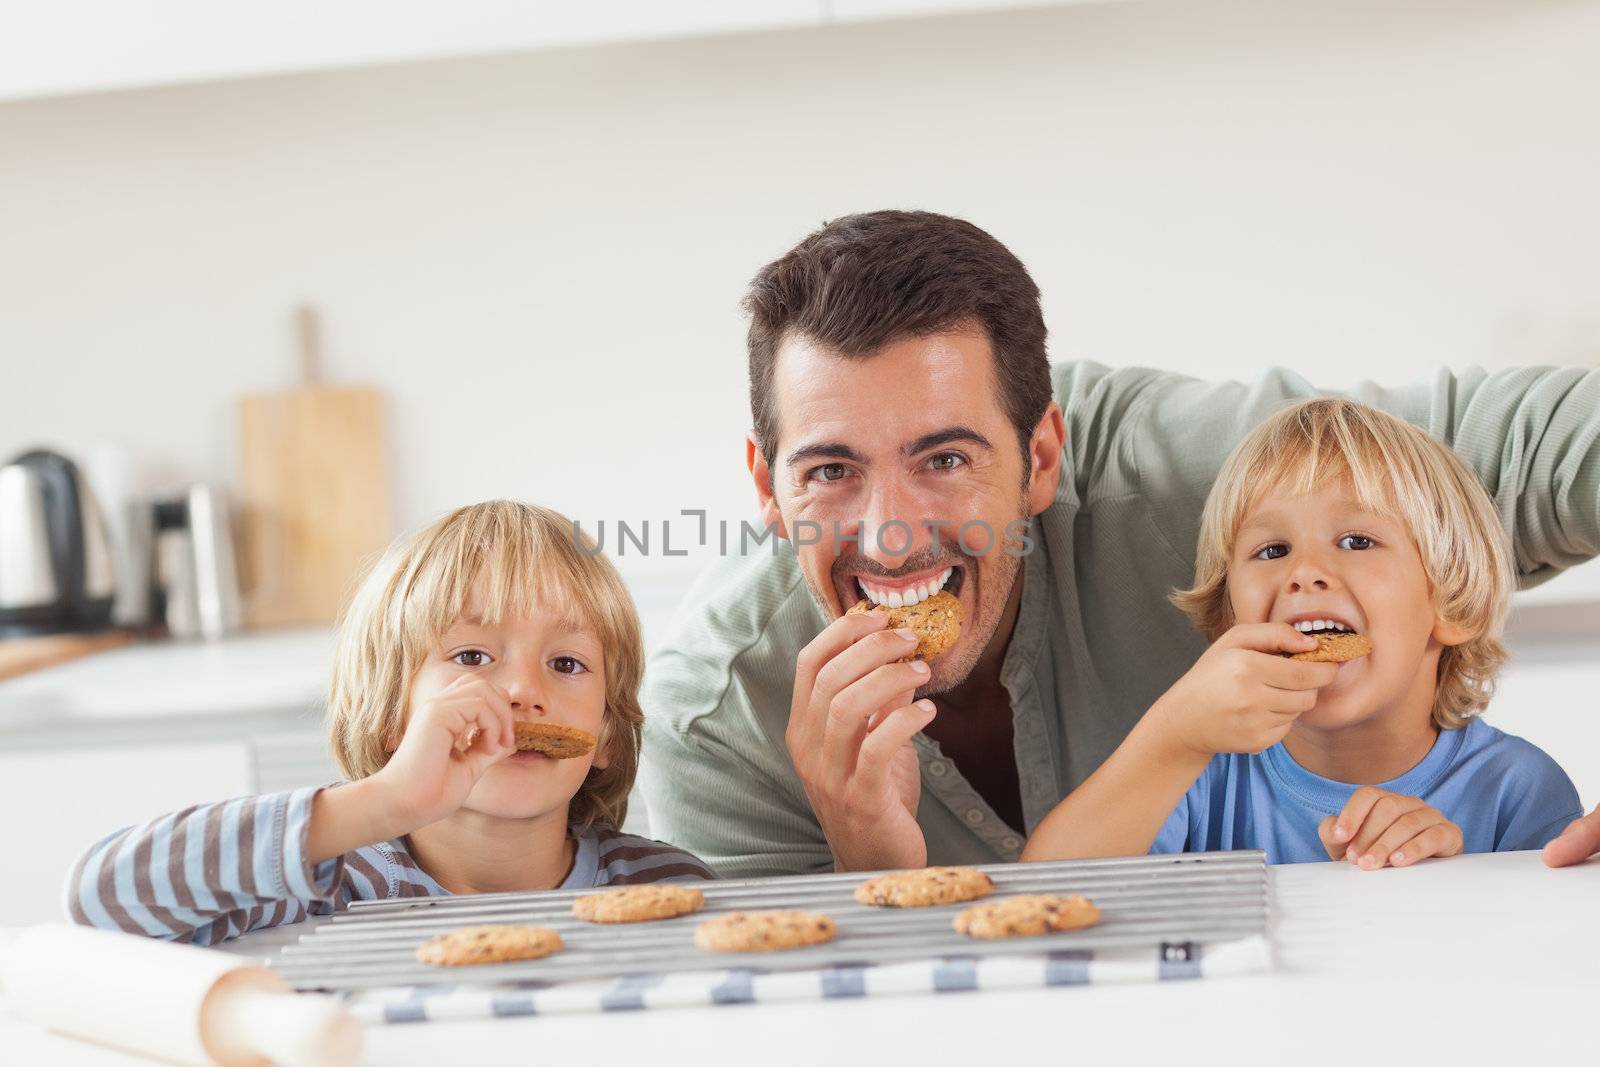 Smiling father and his sons eating cookies in the kitchen